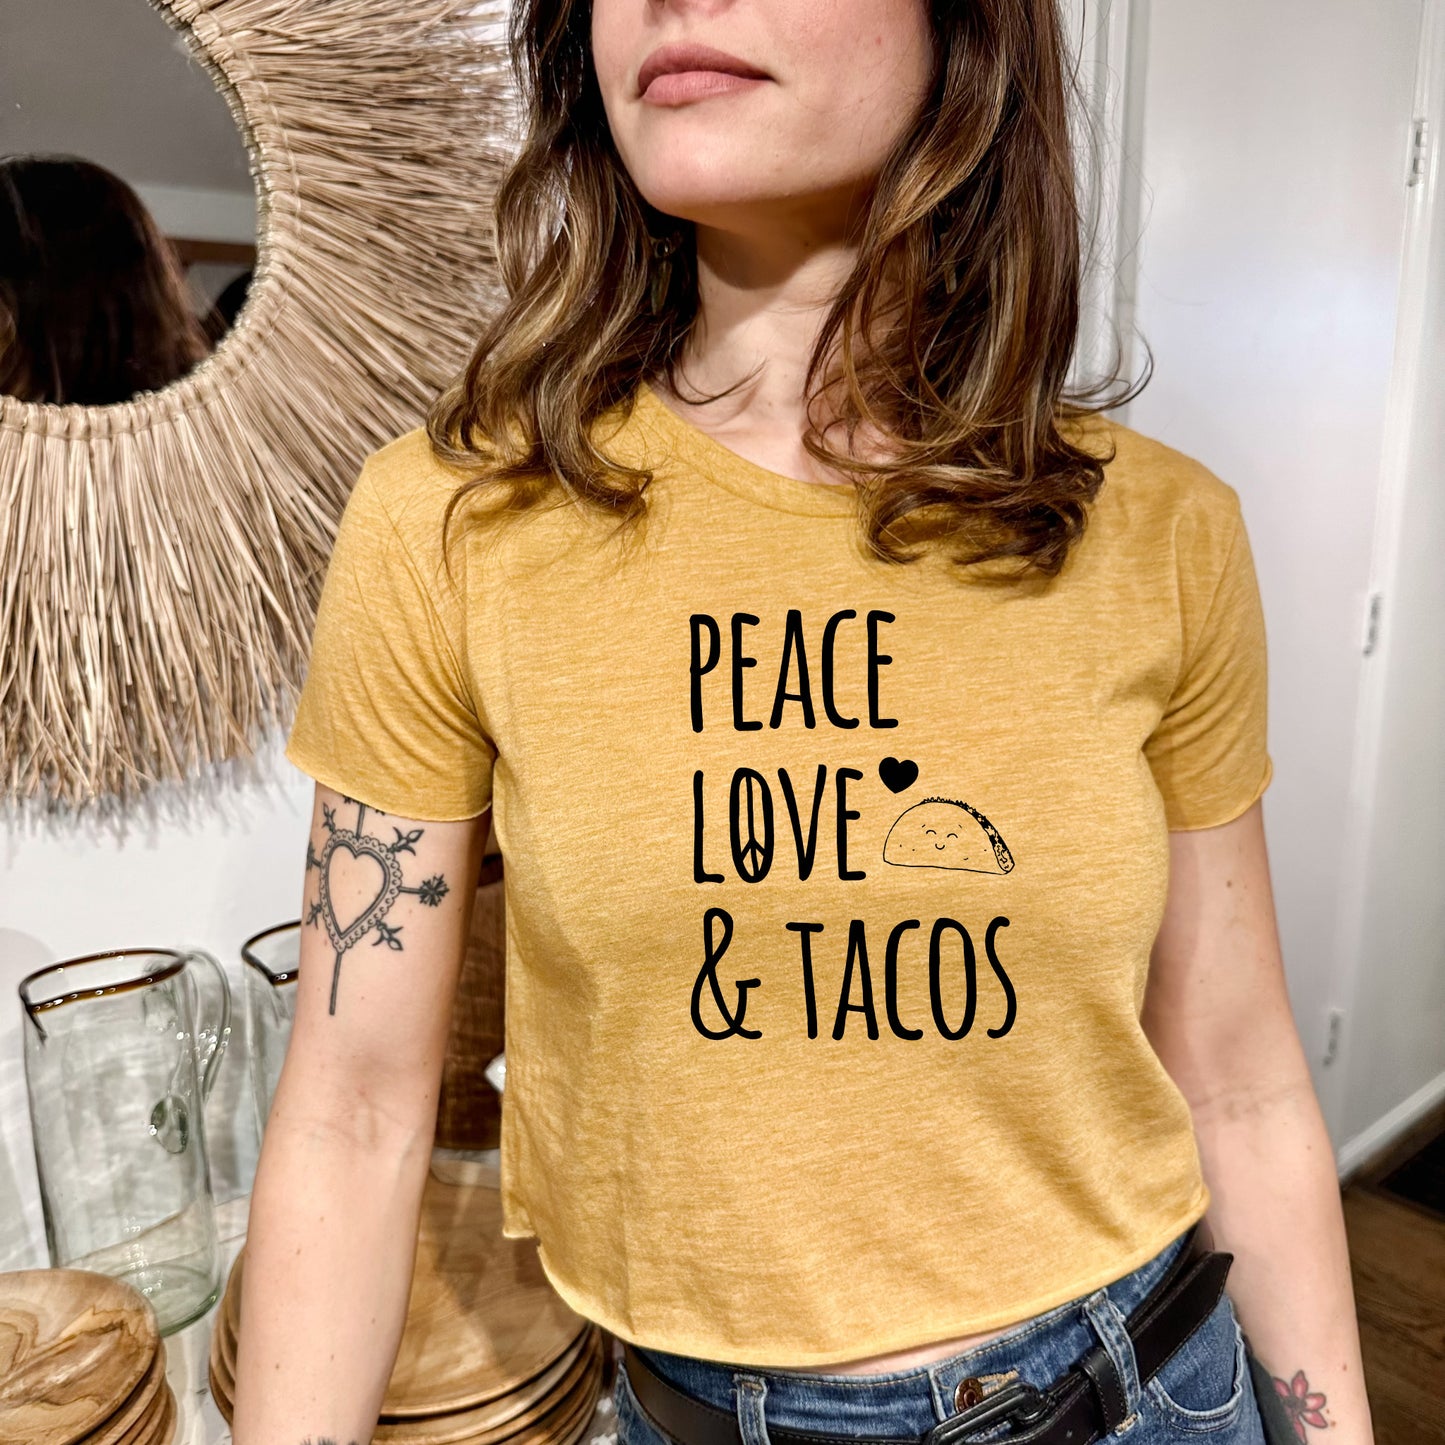 Peace Love & Tacos - Women's Crop Tee - Heather Gray or Gold